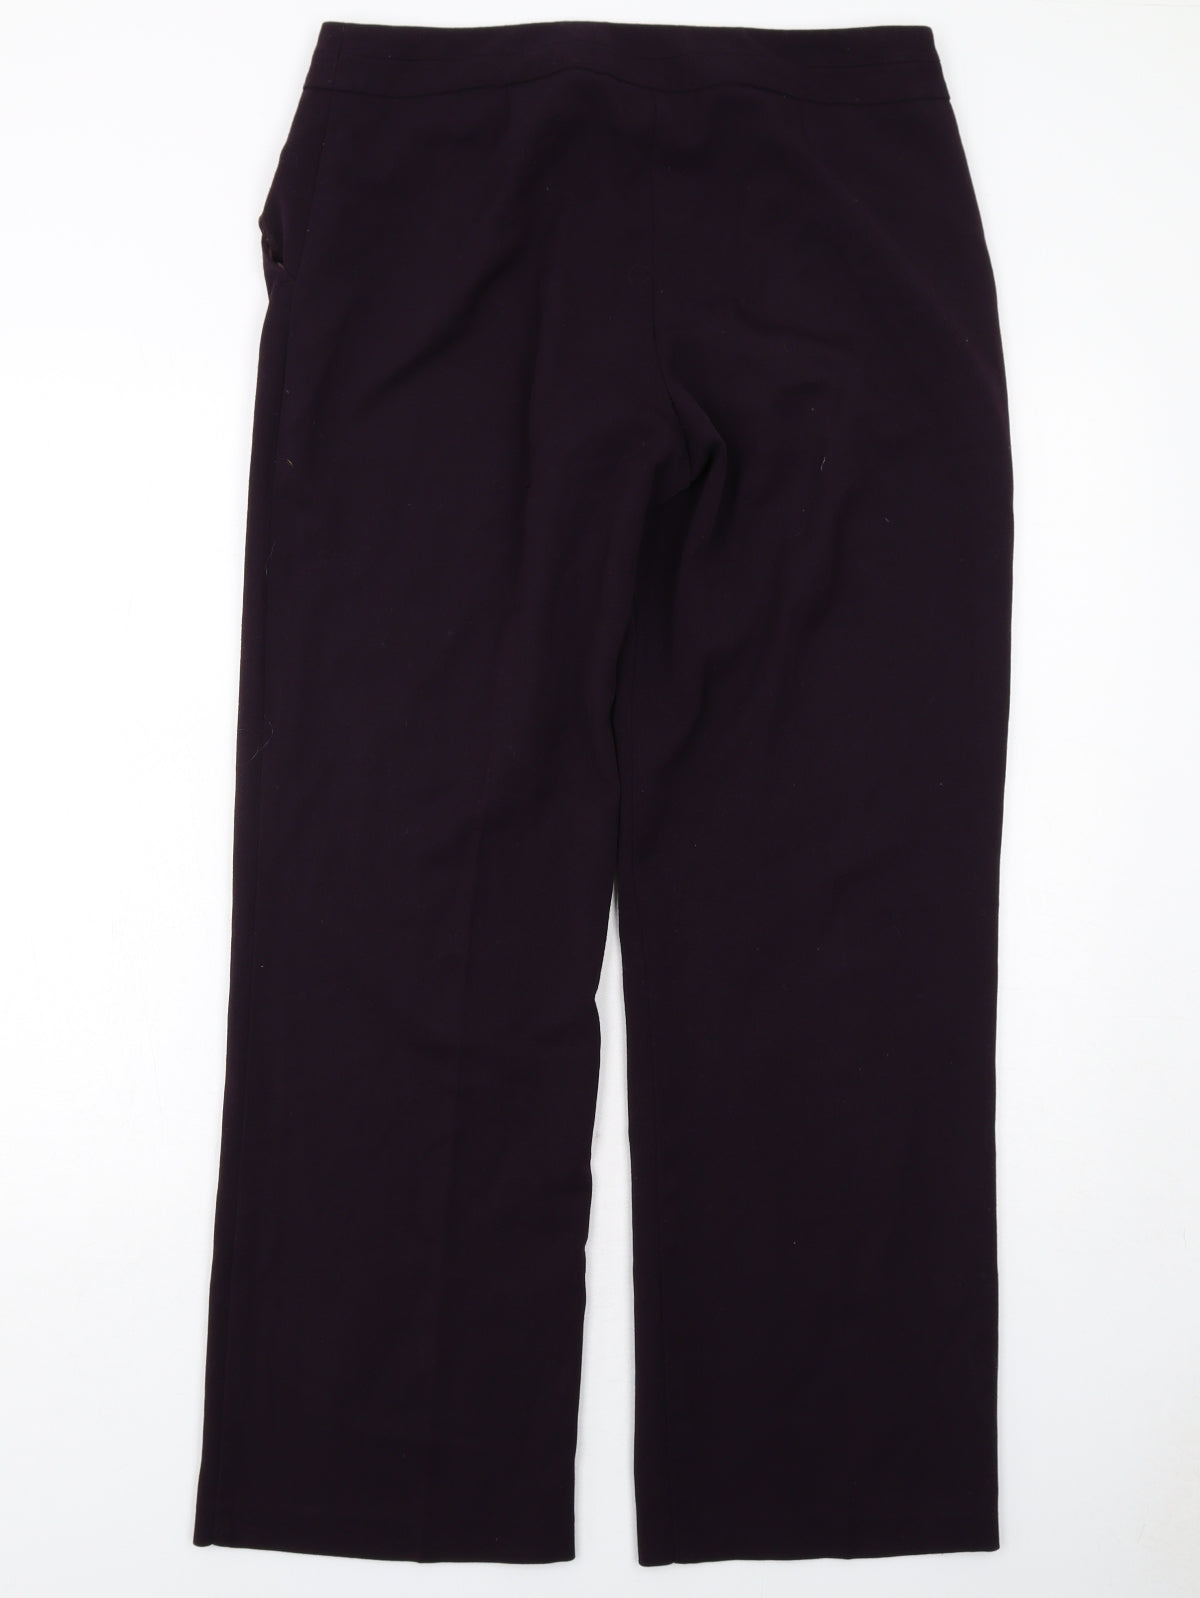 BHS Womens Purple Polyester Trousers Size 14 Regular Zip